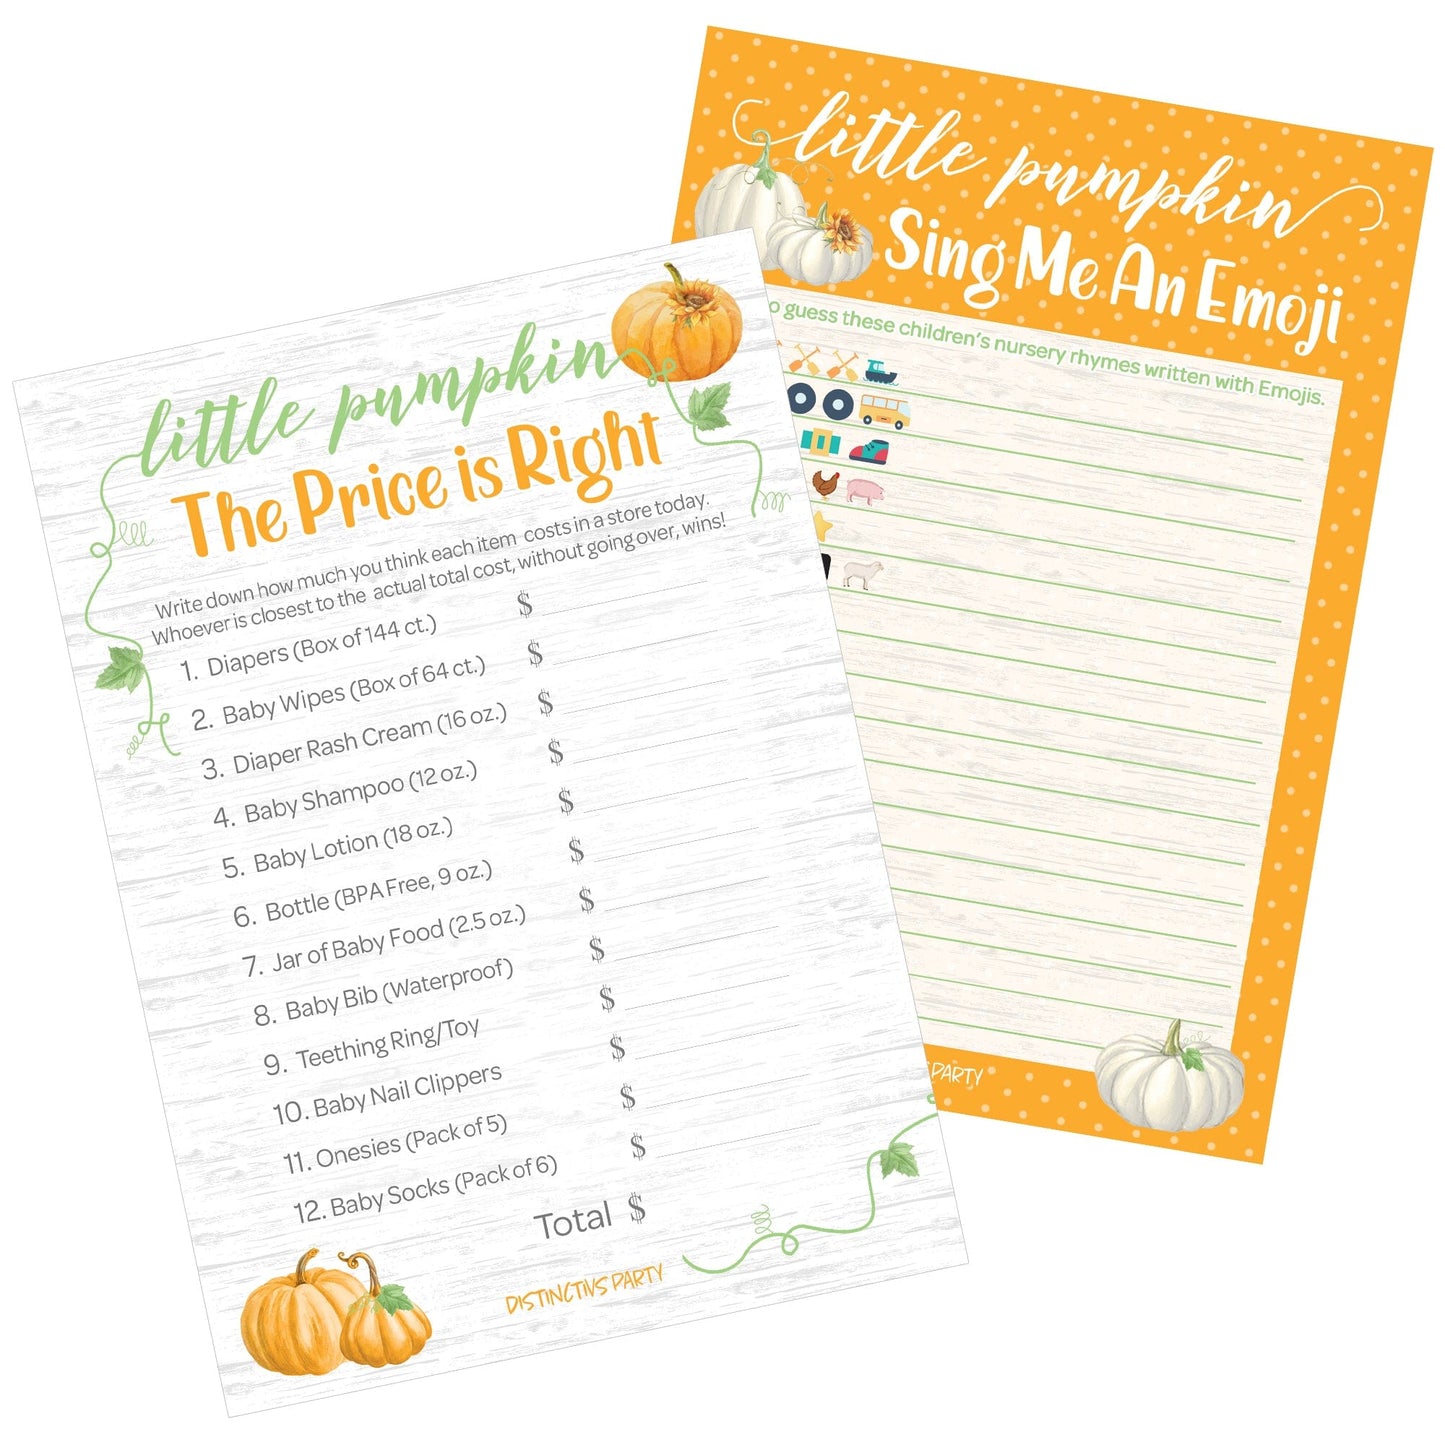 Classic Orange Little Pumpkin Baby Shower 2 Game Bundle - Price is Right and Emoji Party Activity - 20 Dual Sided Cards